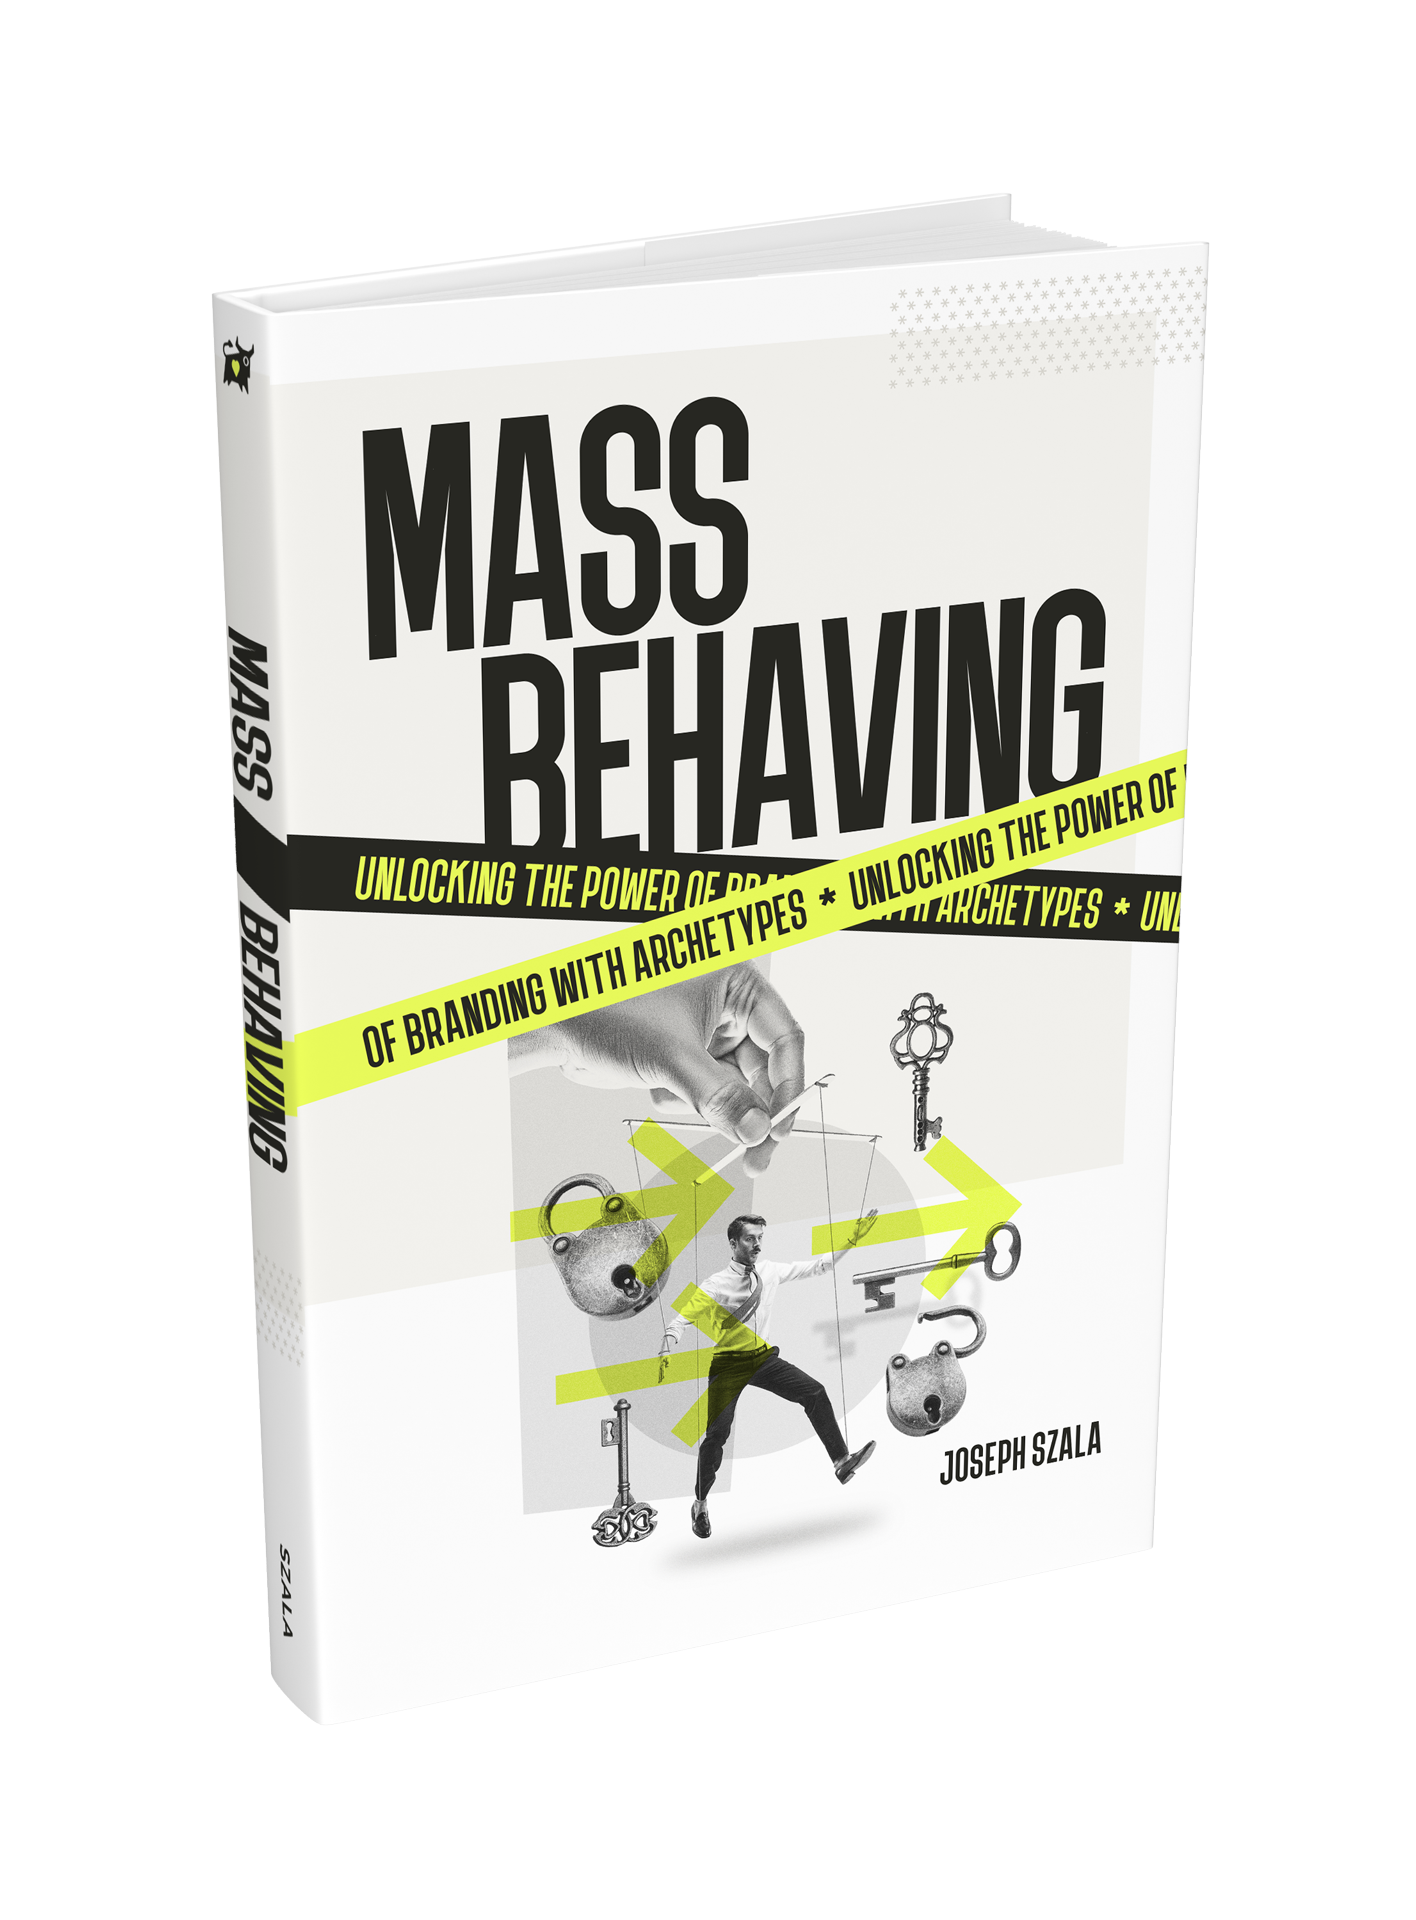 Mass Behaving cover design - book on branding with archetypes